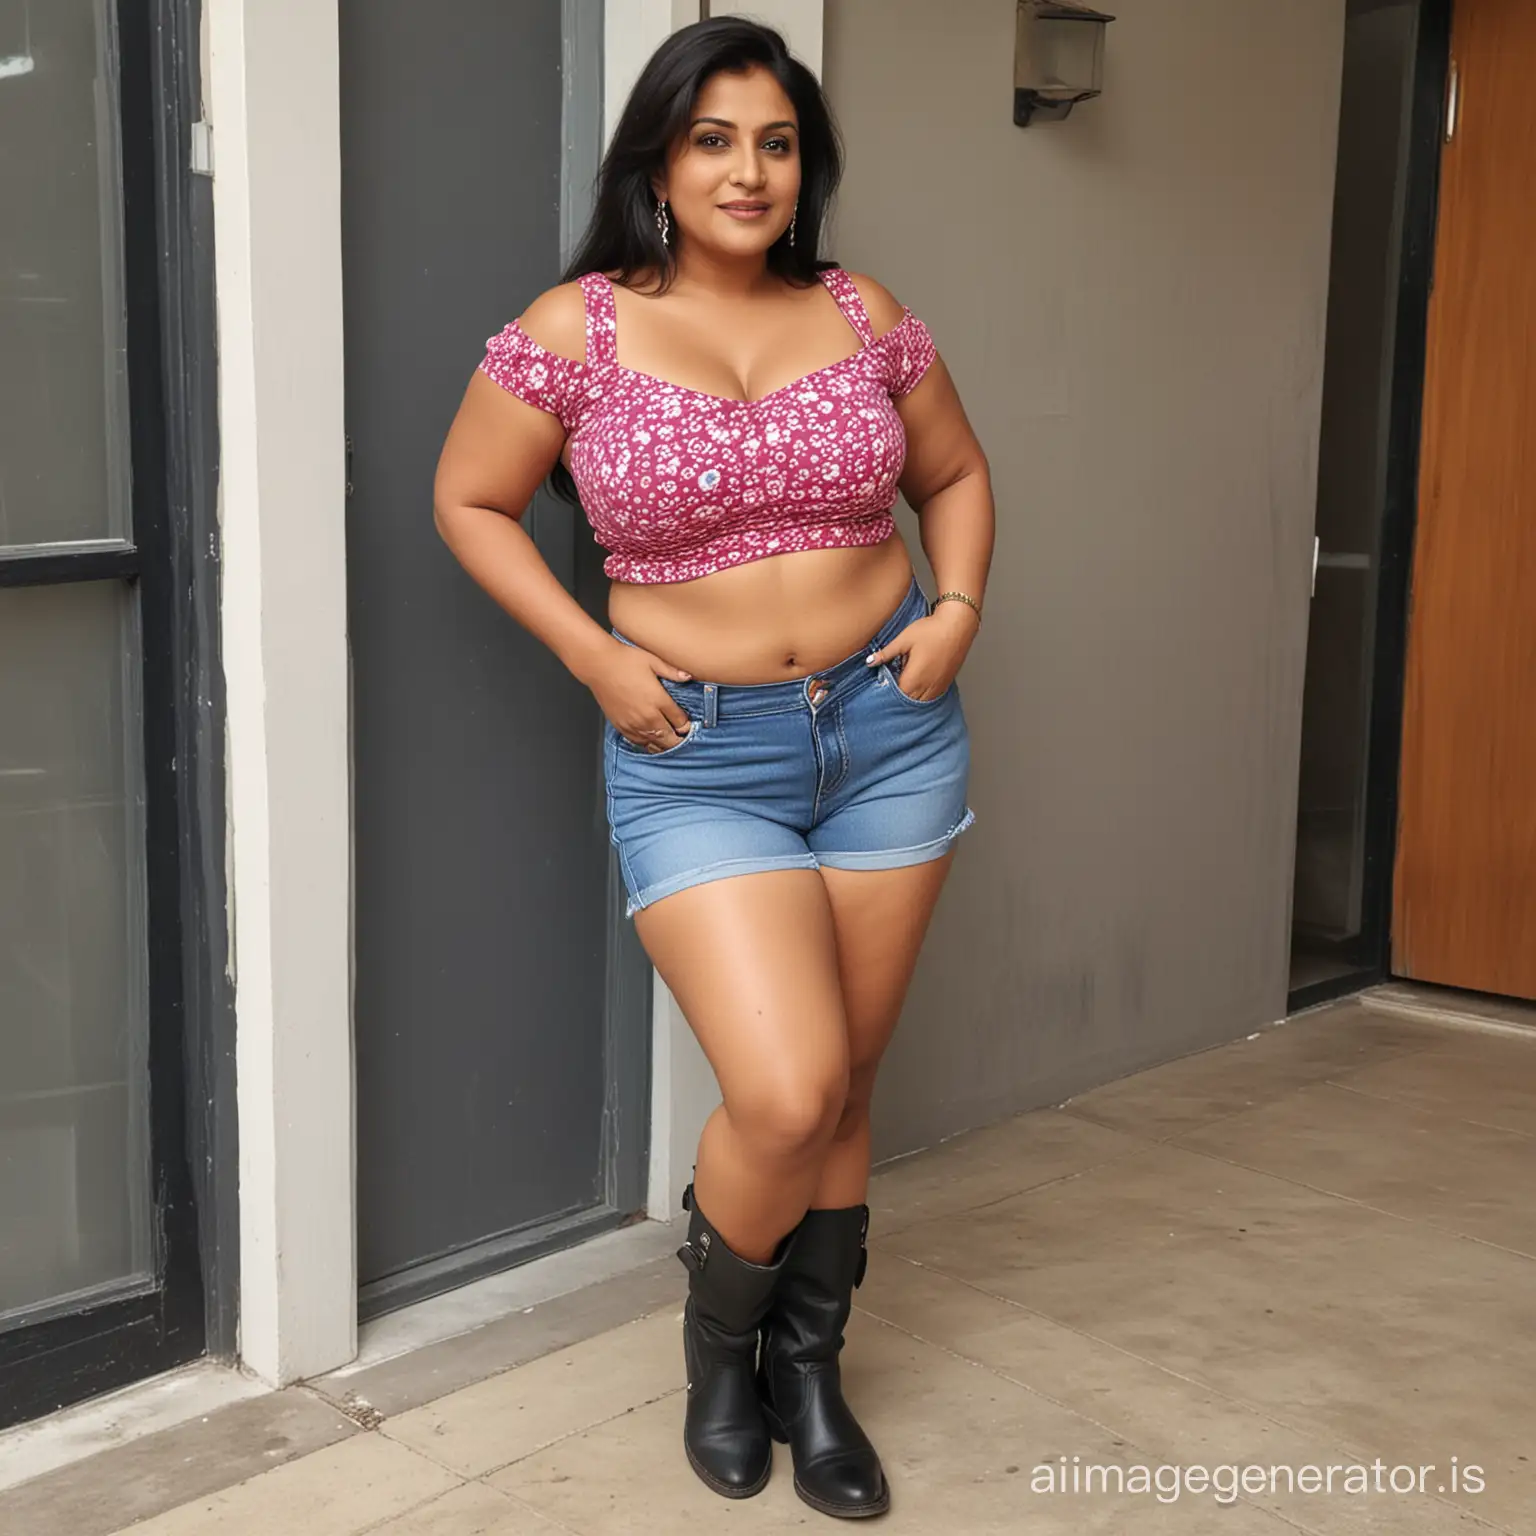 Hot chubby indian mom in her 50s wearing croptop and tight jean shorts and in boots. Curvy tall and sexy. Shows her cleavage. Her thighs are shown Has pretty curvy and chubby thighs